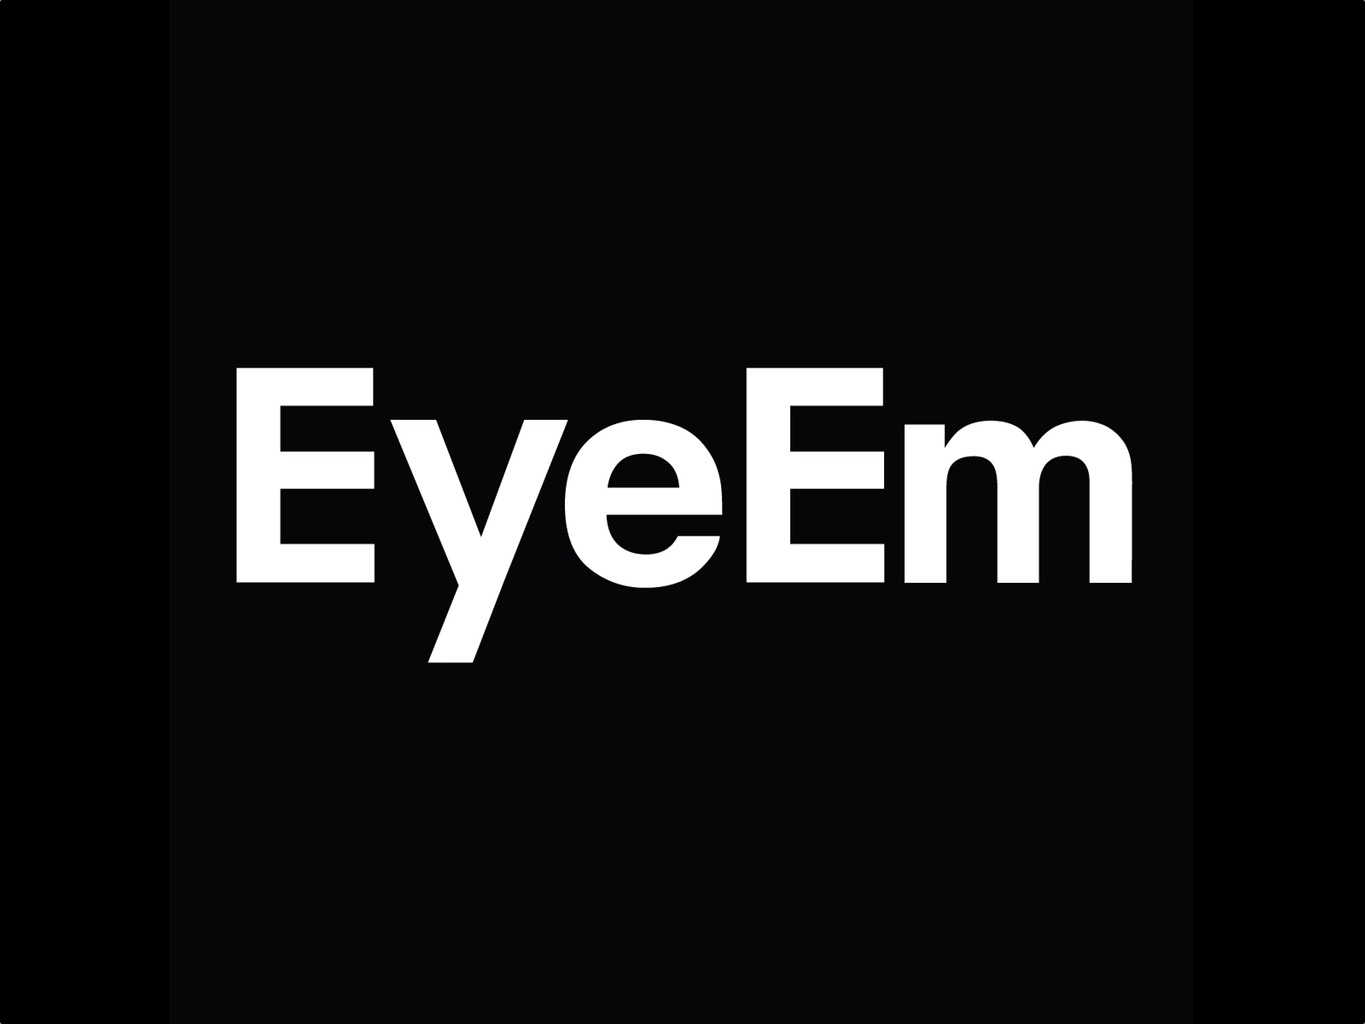 When will my image be reviewed? – EyeEm